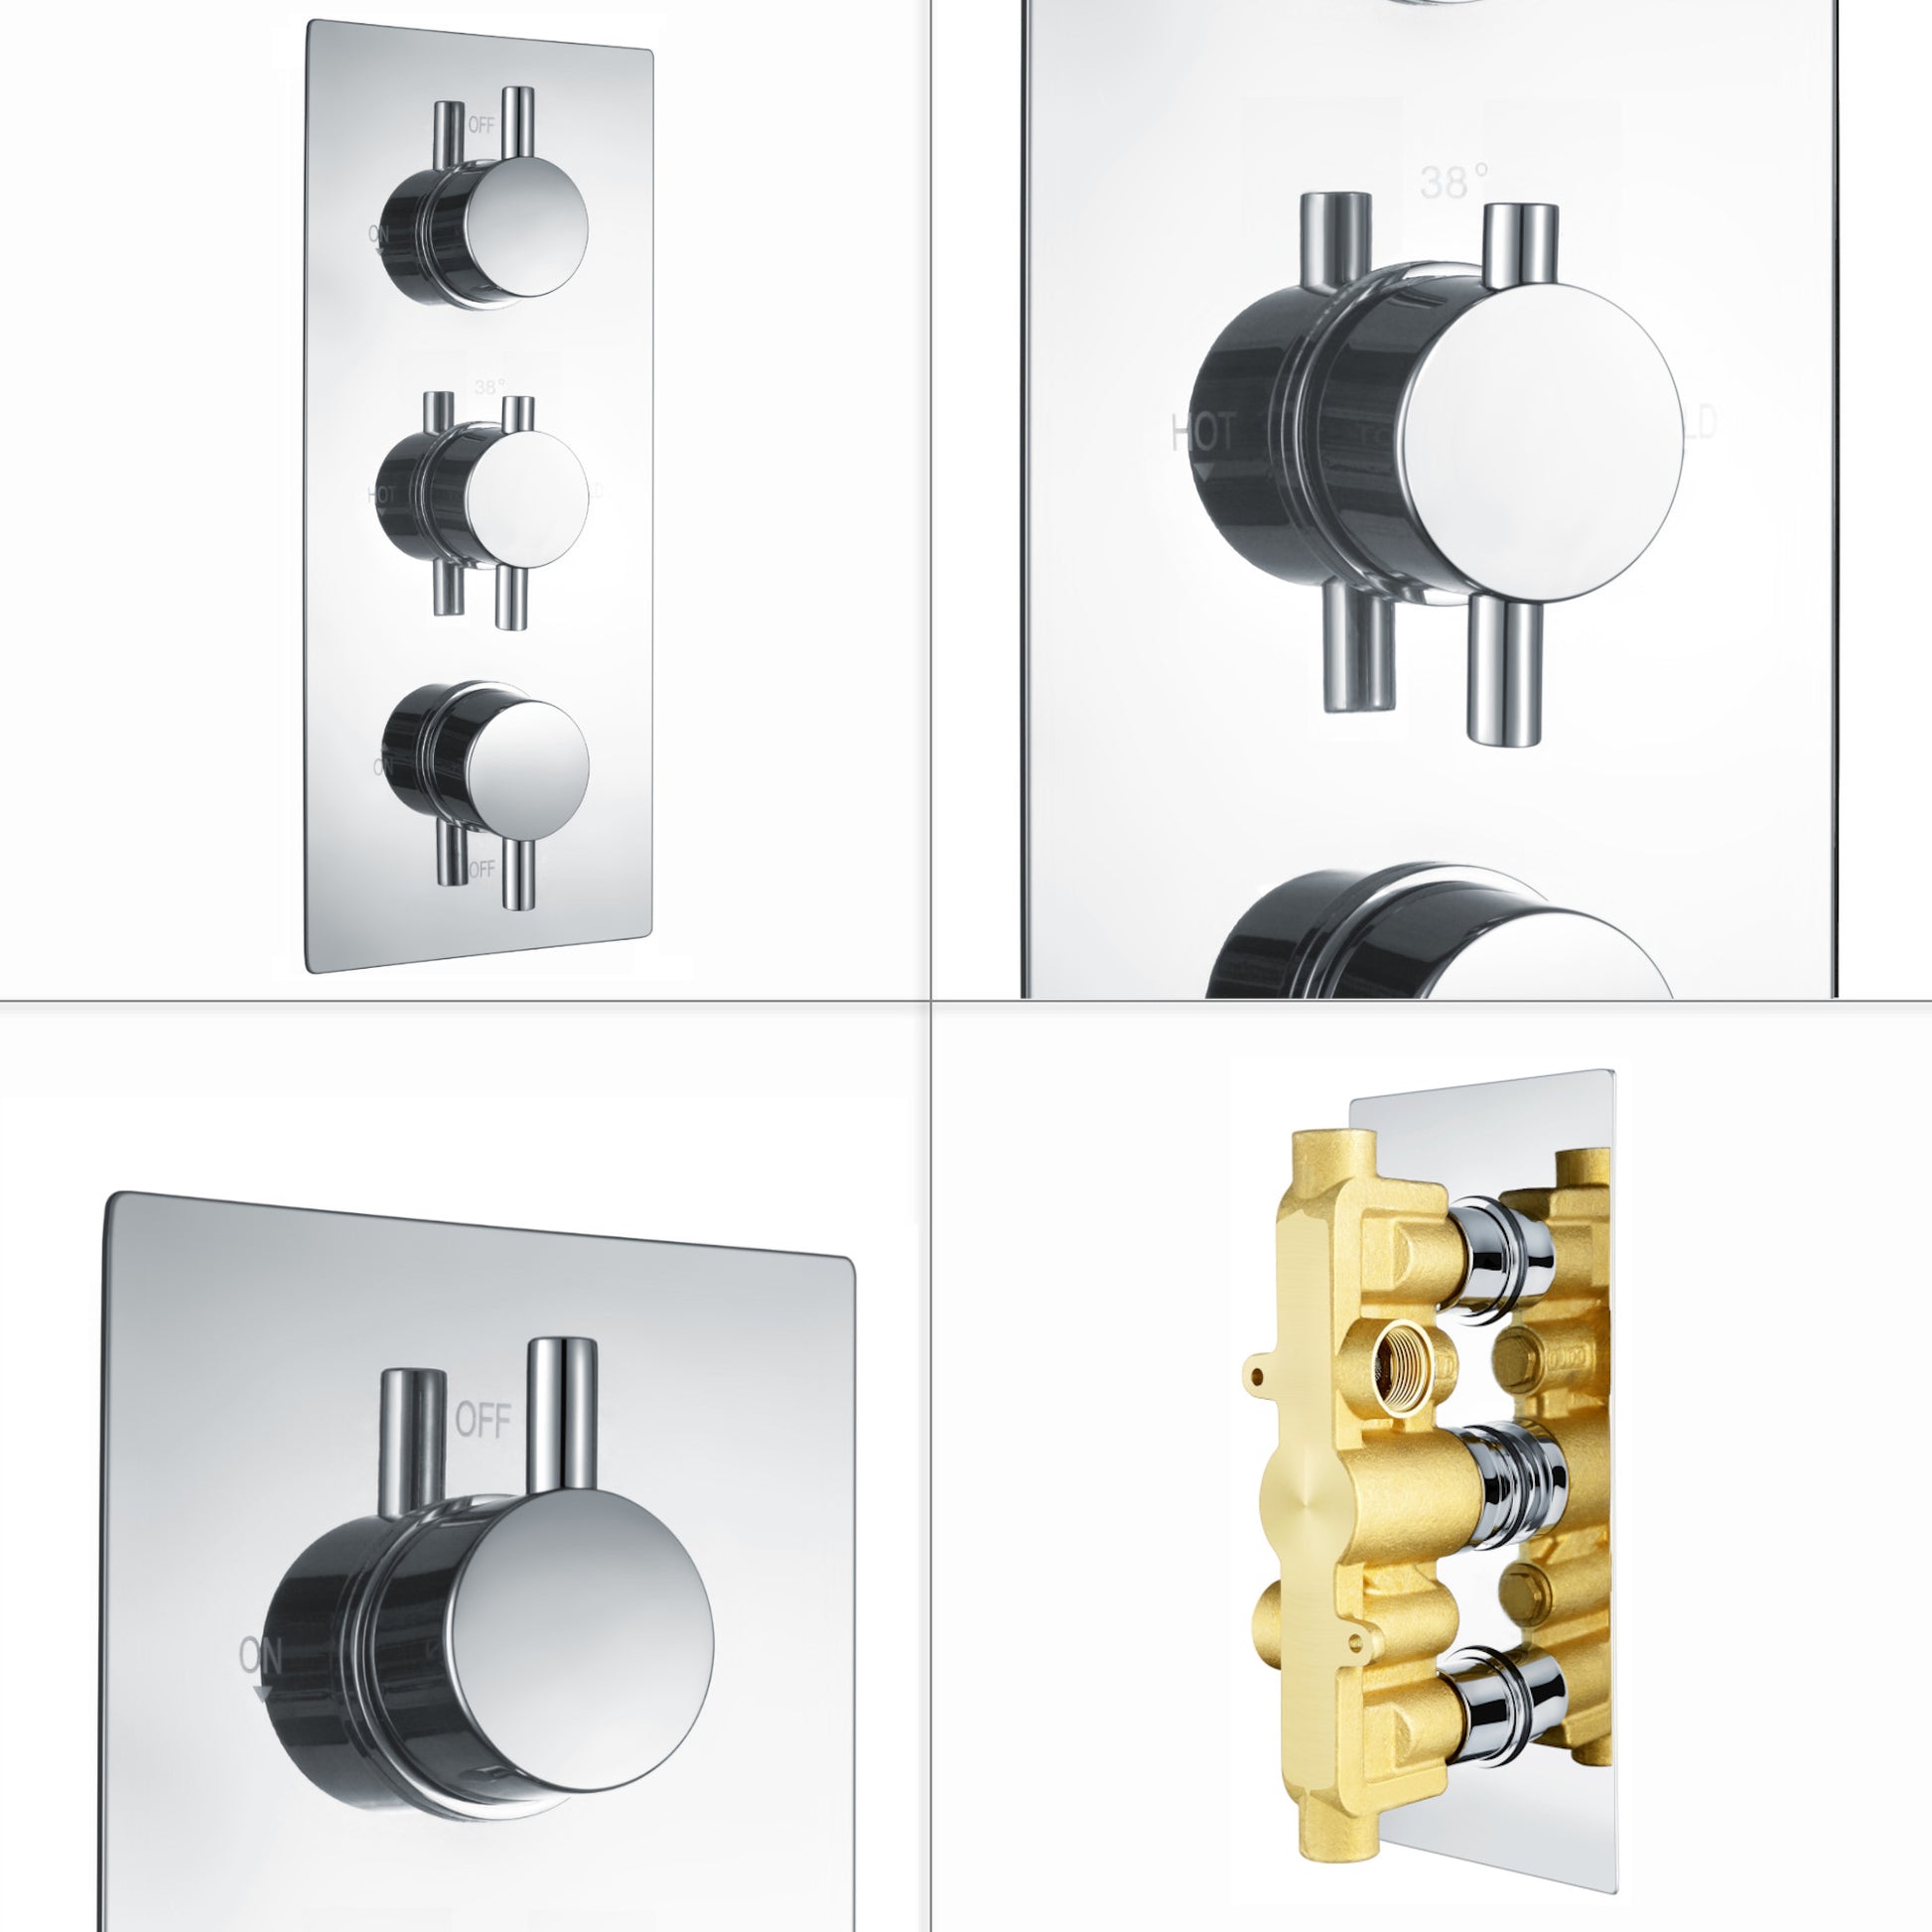 Venice contemporary round concealed thermostatic triple shower valve with 2 outlets - chrome - Showers